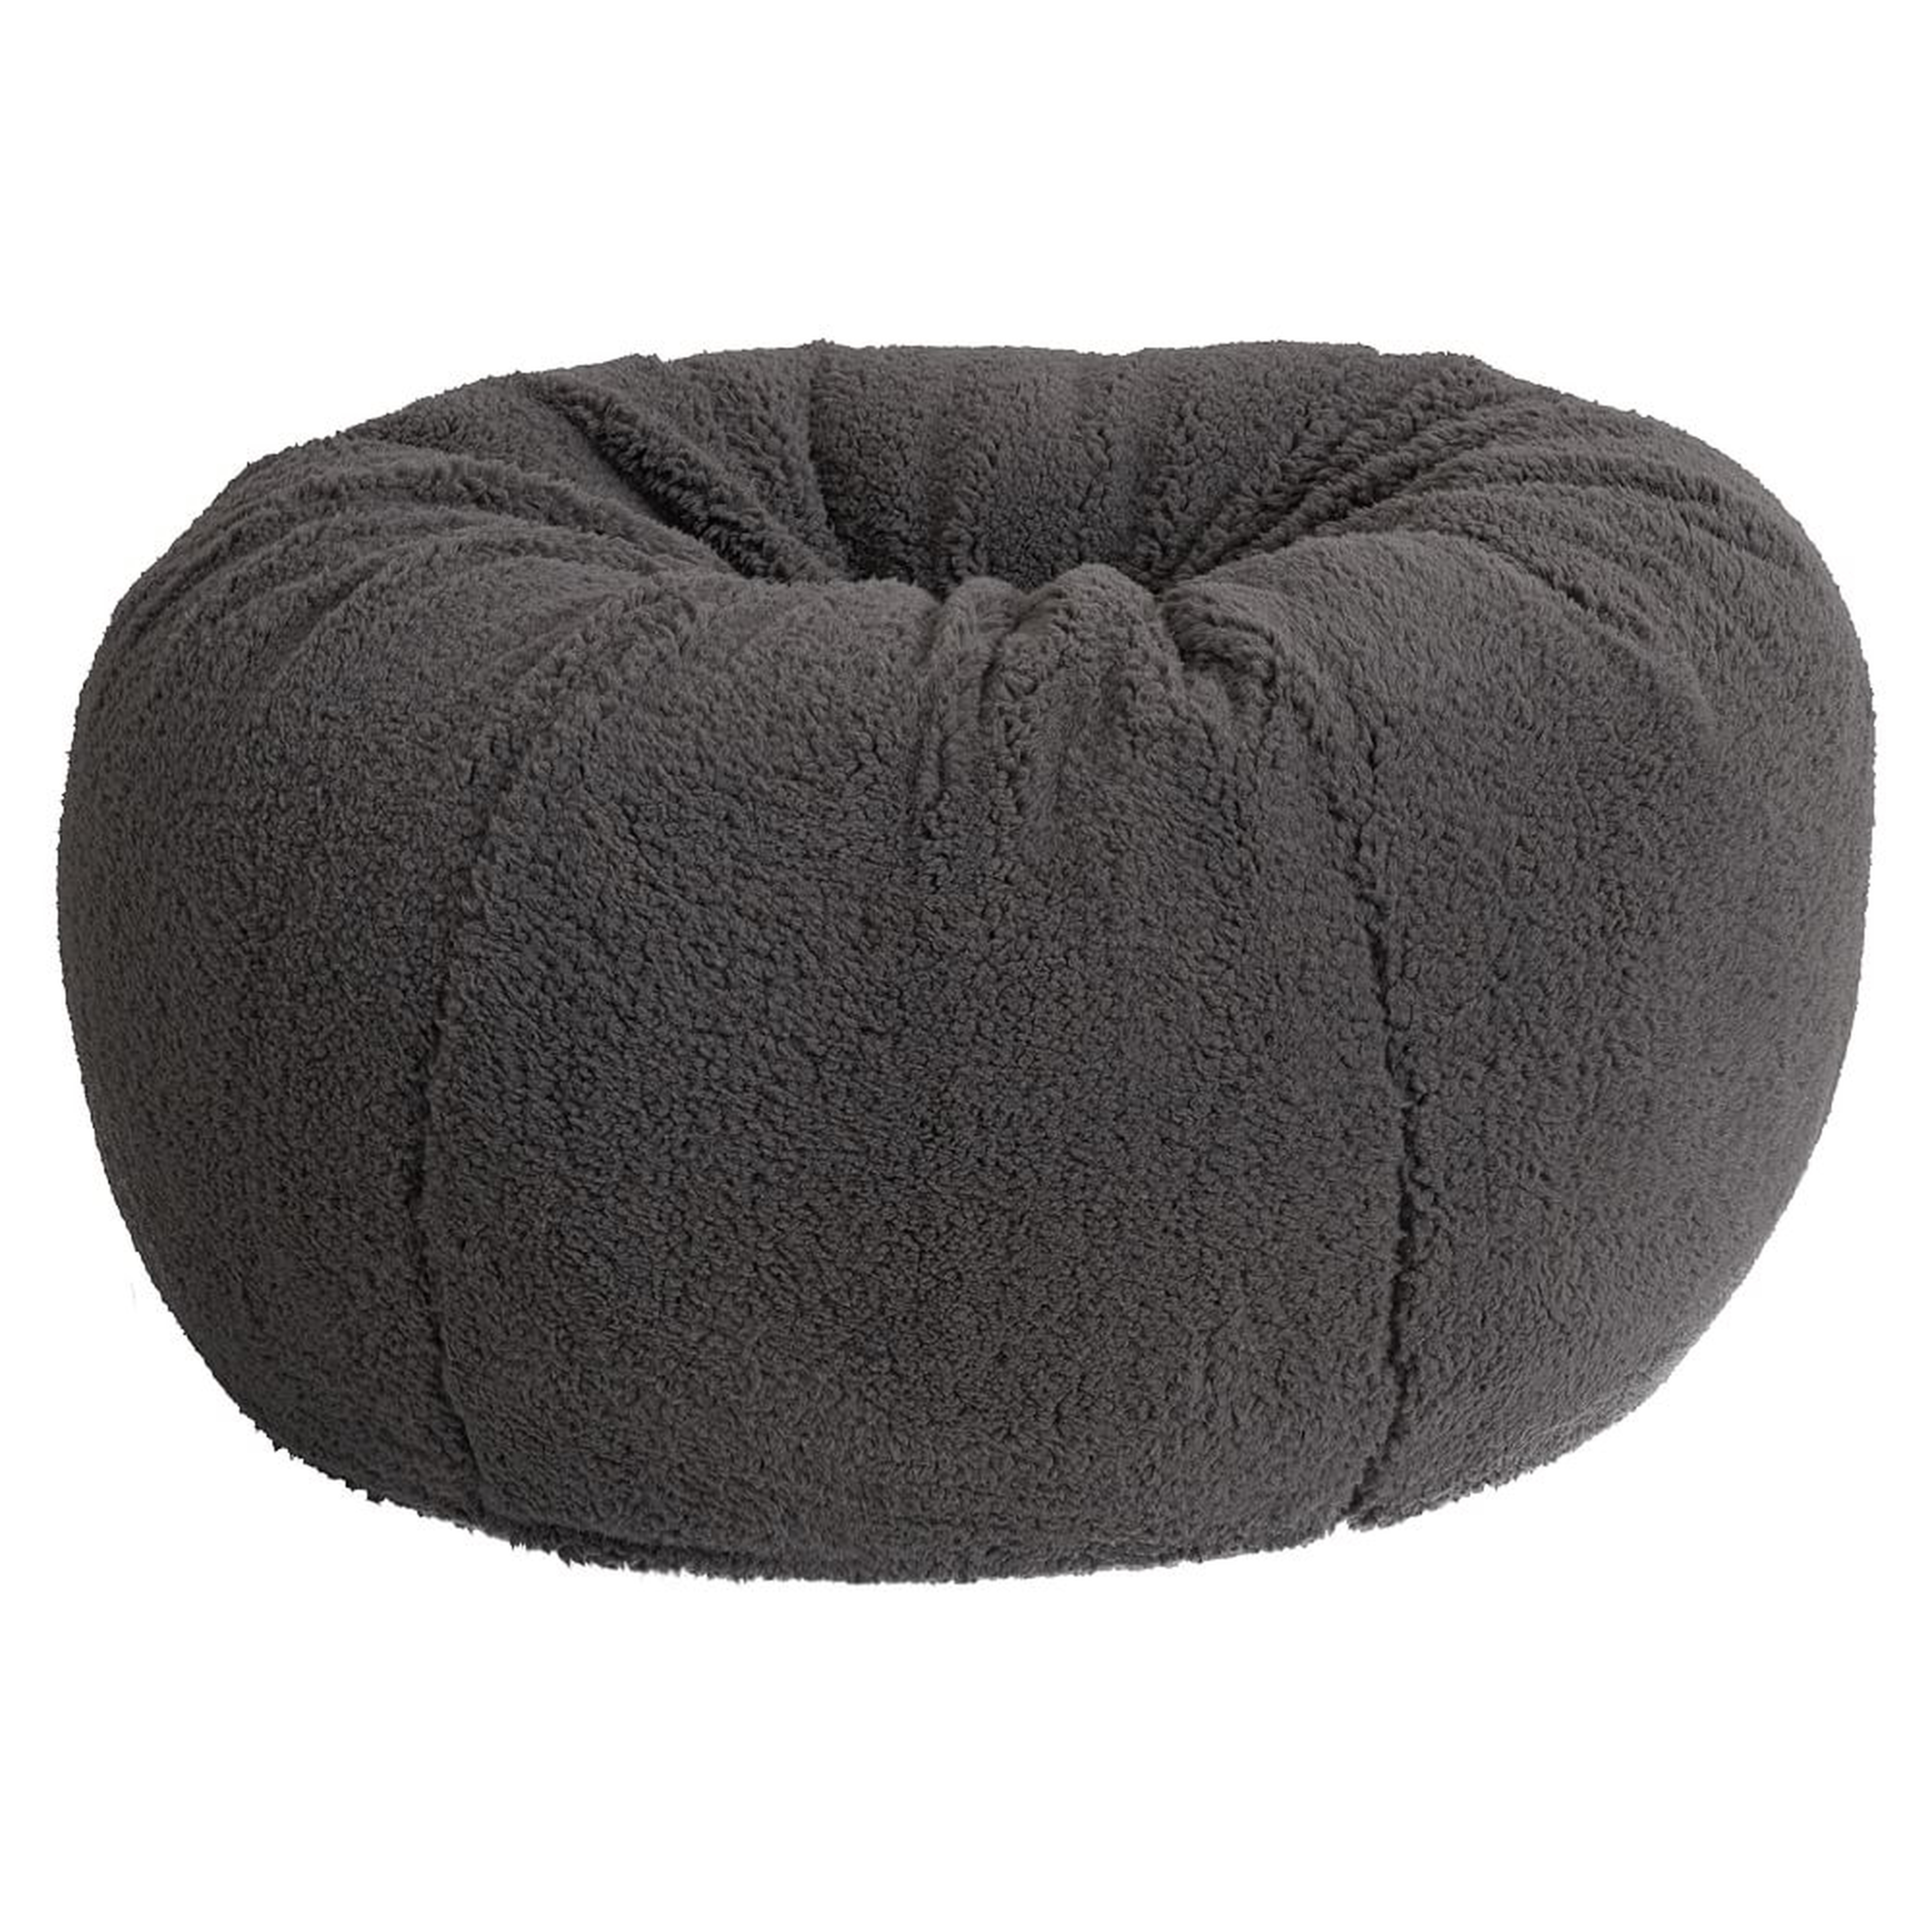 Sherpa Bean Bag Chair Cover + Insert, Large, Charcoal/Black - Pottery Barn Teen